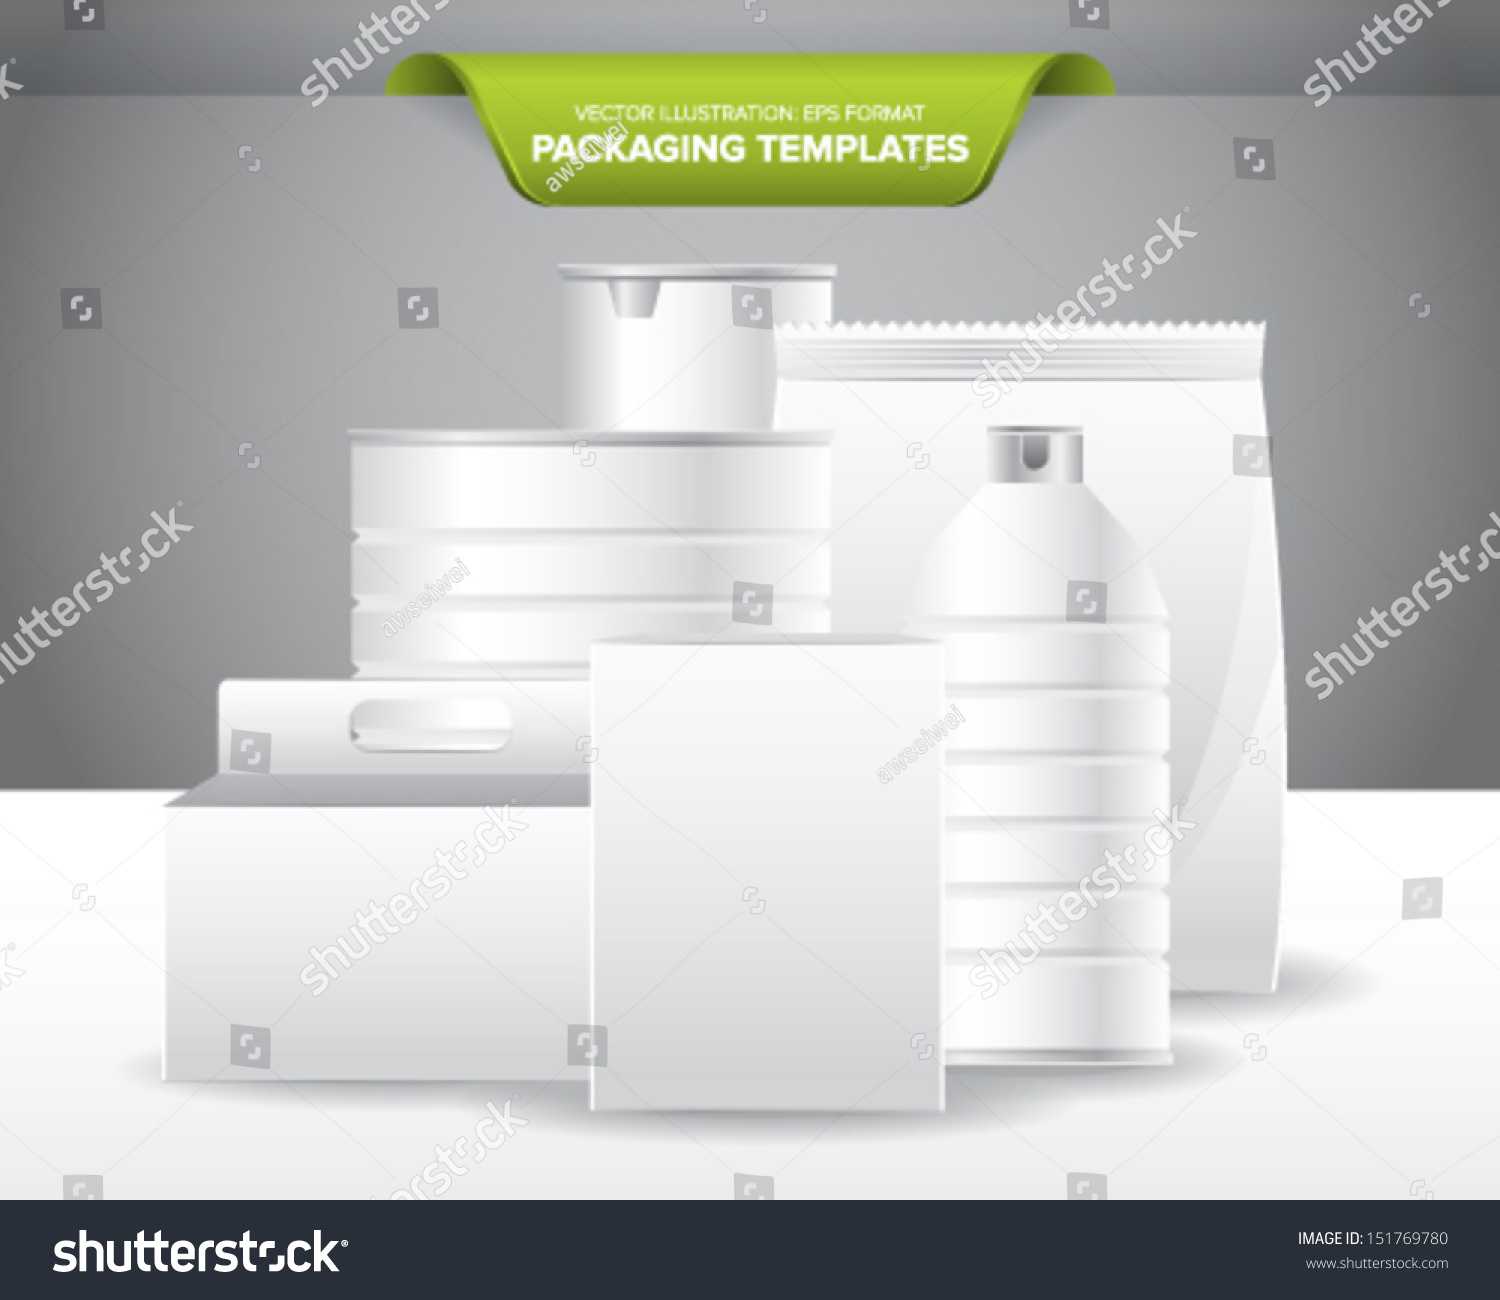 Set Empty Blank Packaging Templates Food Stock Image Inside Blank Packaging Templates